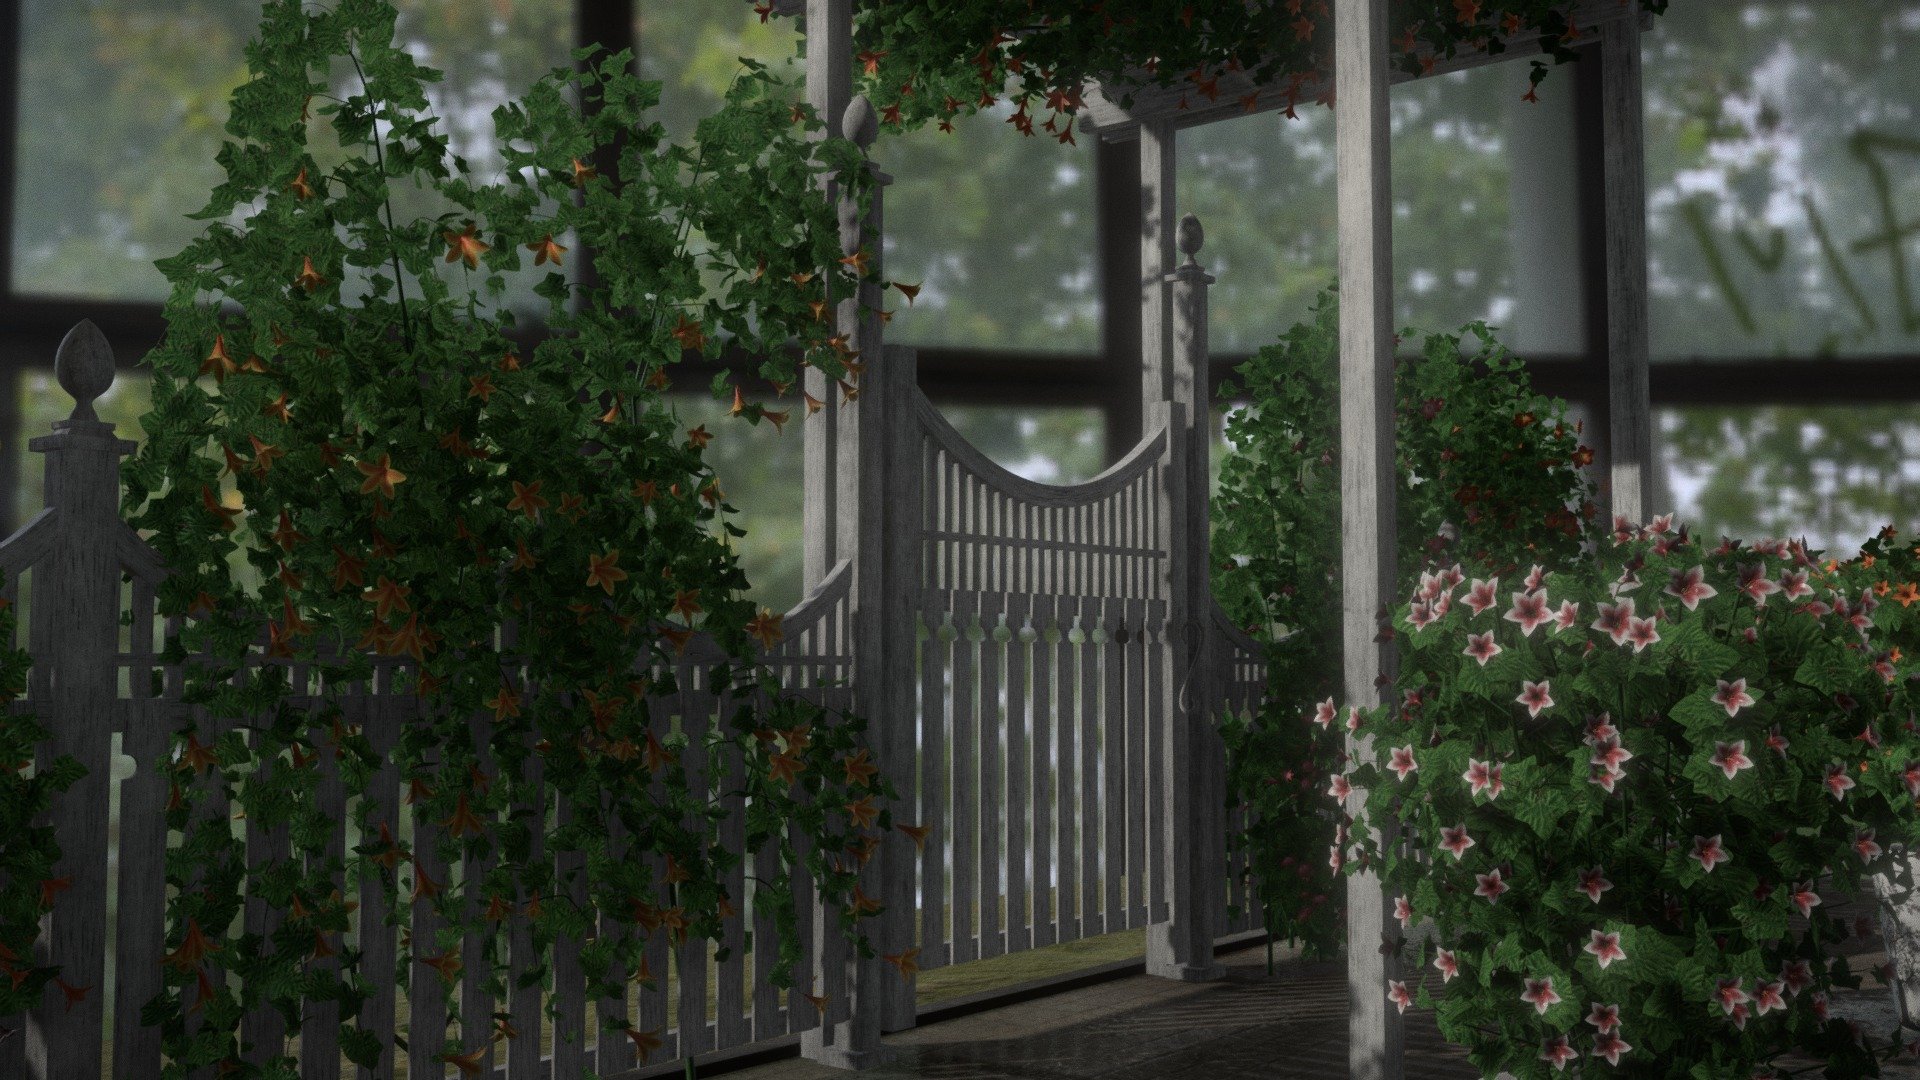 Flowering Vines with Plants with Fence and pots.


Preview Ivy/Vines Click Here

Assets Included:-

5 small ivy/vines with flower variations
5 Large ivy/Vines with flower Variations
5 Flowering Plants/Bust Variations;it can be used as hanging plants
5 Pots
Modular Fence with Gate
3 Flower color Texture Variations


Things you can do with this asset pack:

Translate,Rotate and Scale the vines and use them in any assets/Project you like.
Make full garden using this fence modular pack.
use pots for internal and external renders
flowering Plant/Bush can be used as bushes.
Things are not limited just follow your imagination.


Thank You


Additional Files Structure

Export Folder contain all the fbx model
Texture folder contain all the Textures
Fence blend file
Vines blend file
pots blend file
Sketchfab Scene file

Thank You! - Flower-Vines/Ivy with Plants & Fence - Buy Royalty Free 3D model by Nicholas-3D (@Nicholas01) 3d model